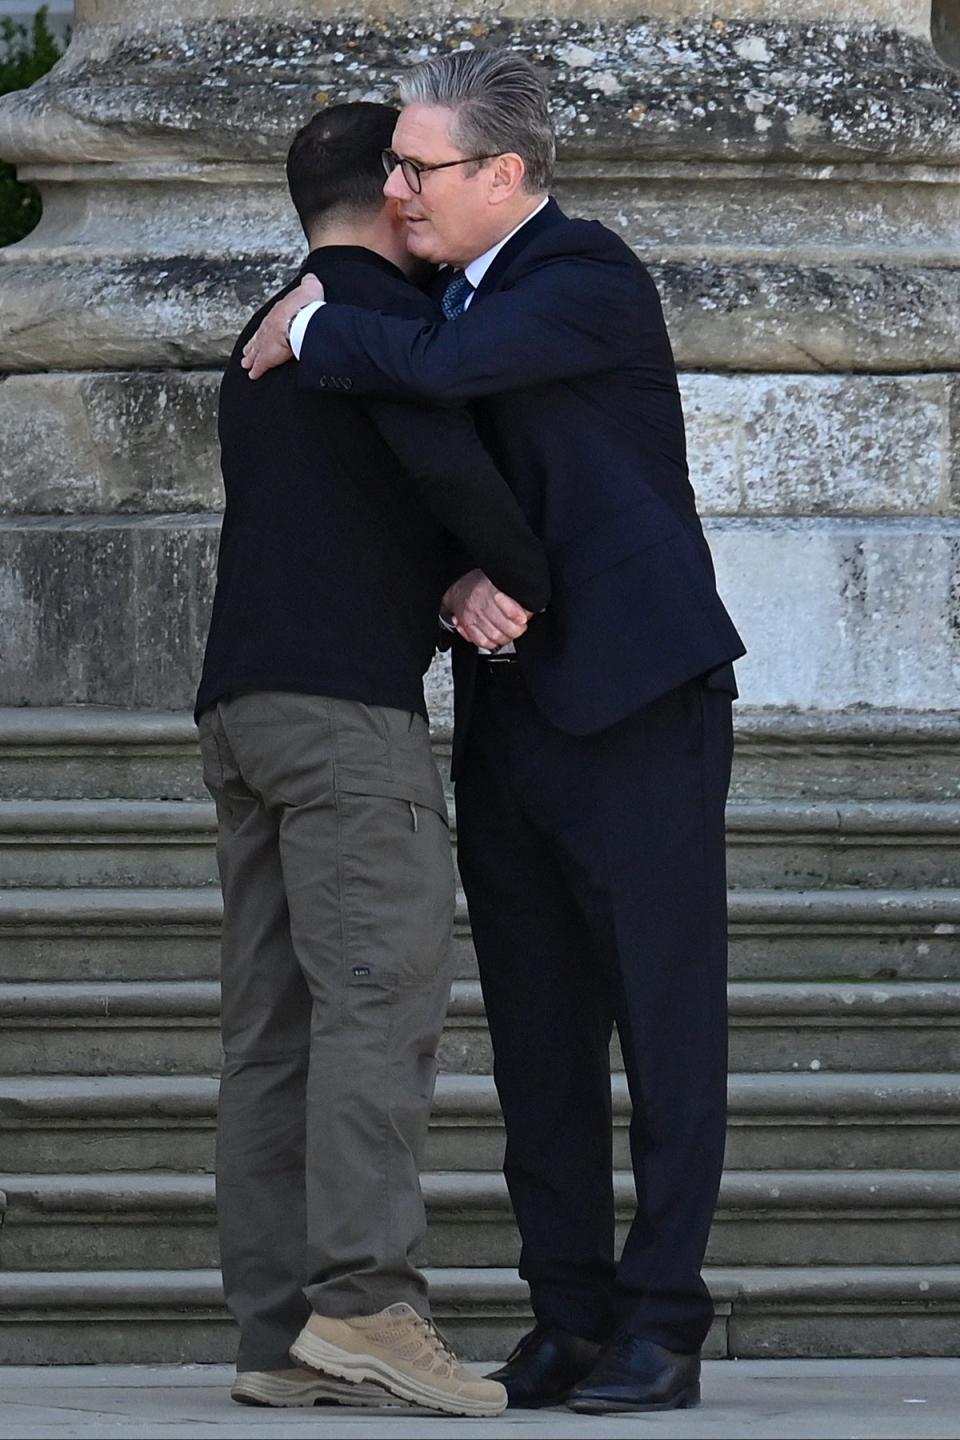 Ukrainian president Volodymyr Zelensky and British prime minister Sir Keir Starmer embrace in the grand entrance of Blenheim Palace (AFP via Getty Images)